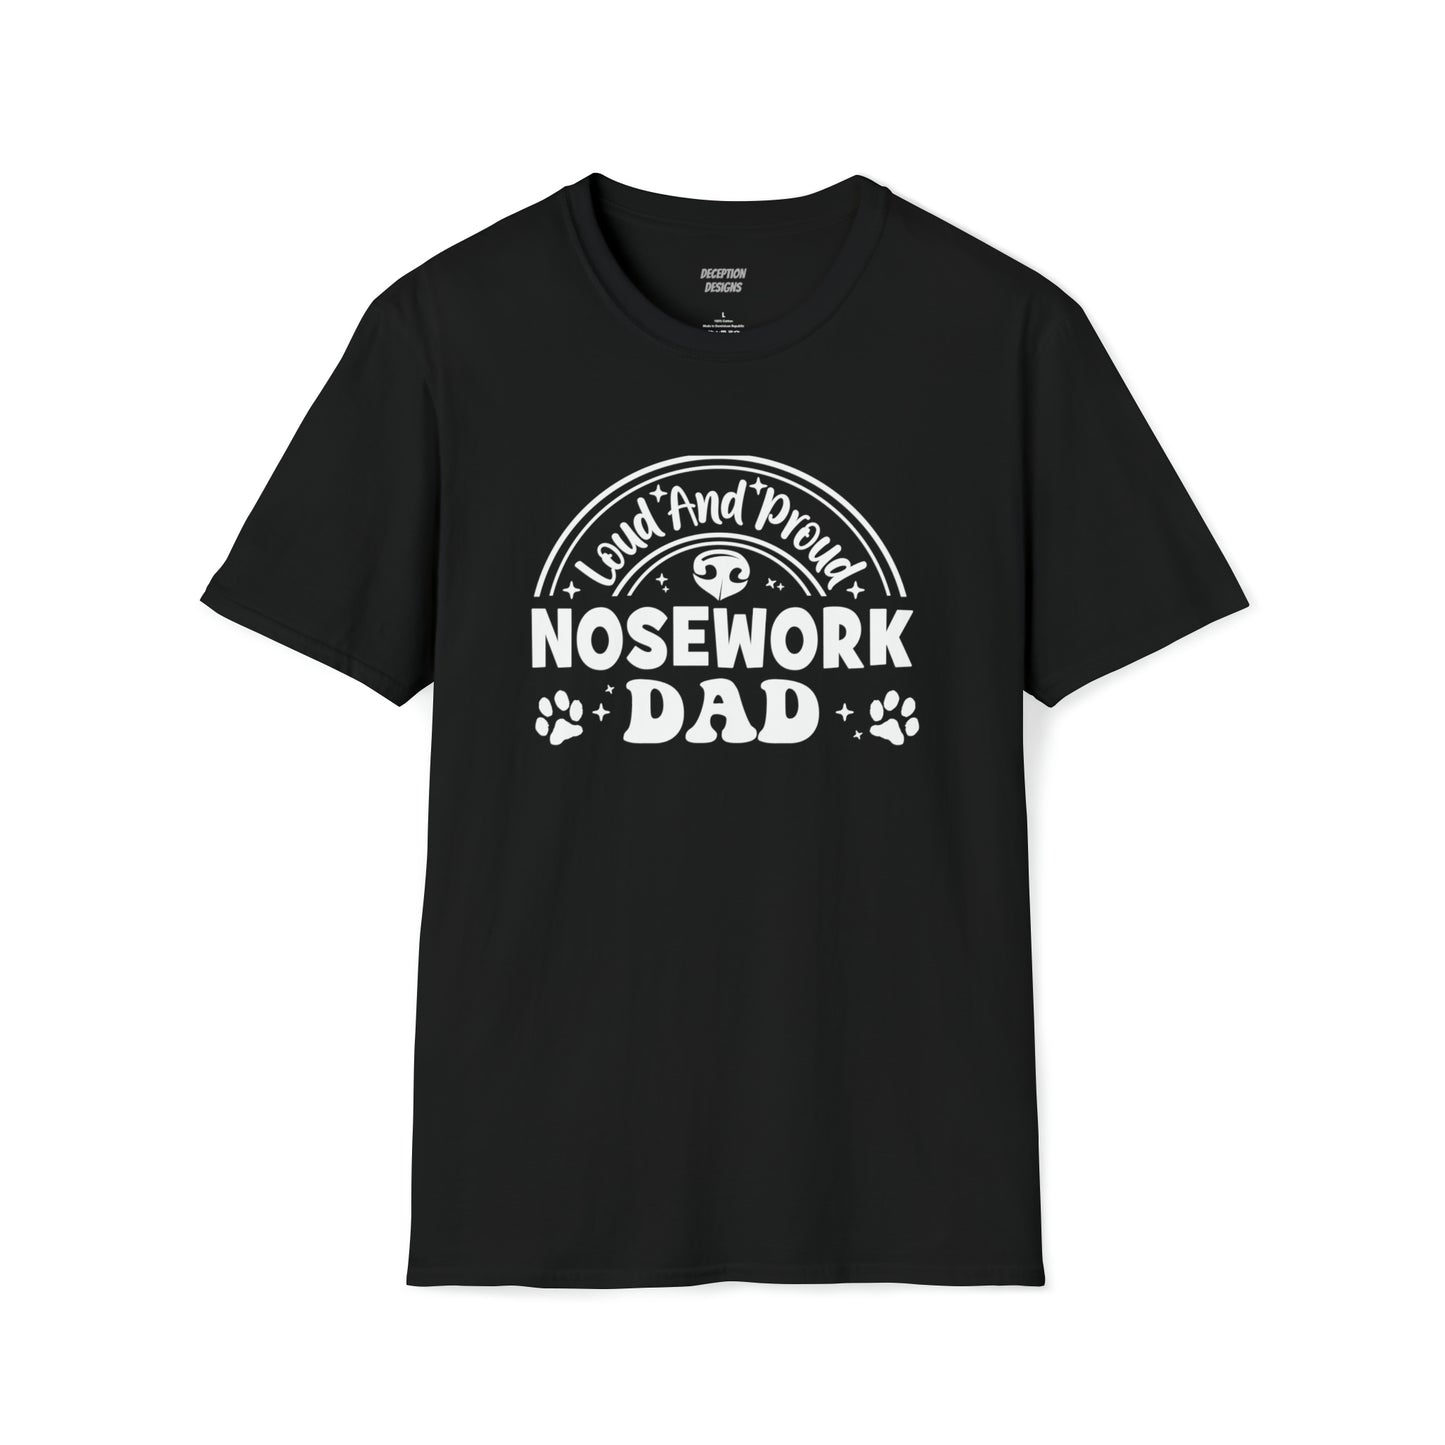 LOUD PROUD NOSEWORK DAD 2 -  Unisex Softstyle T-Shirt